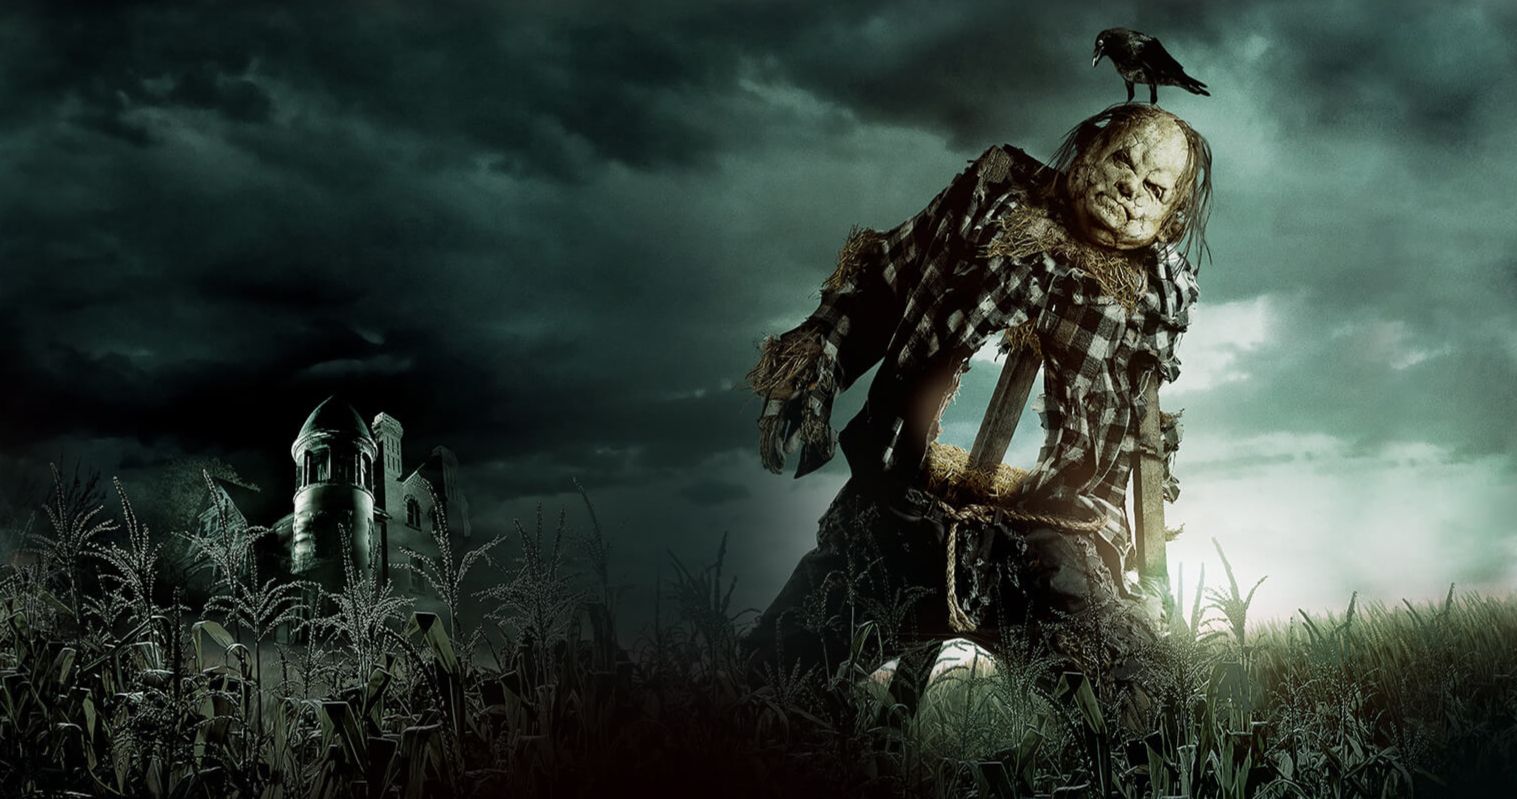 Scary Stories to Tell in the Dark Stays True to Kid-Friendly Roots with PG-13 Rating